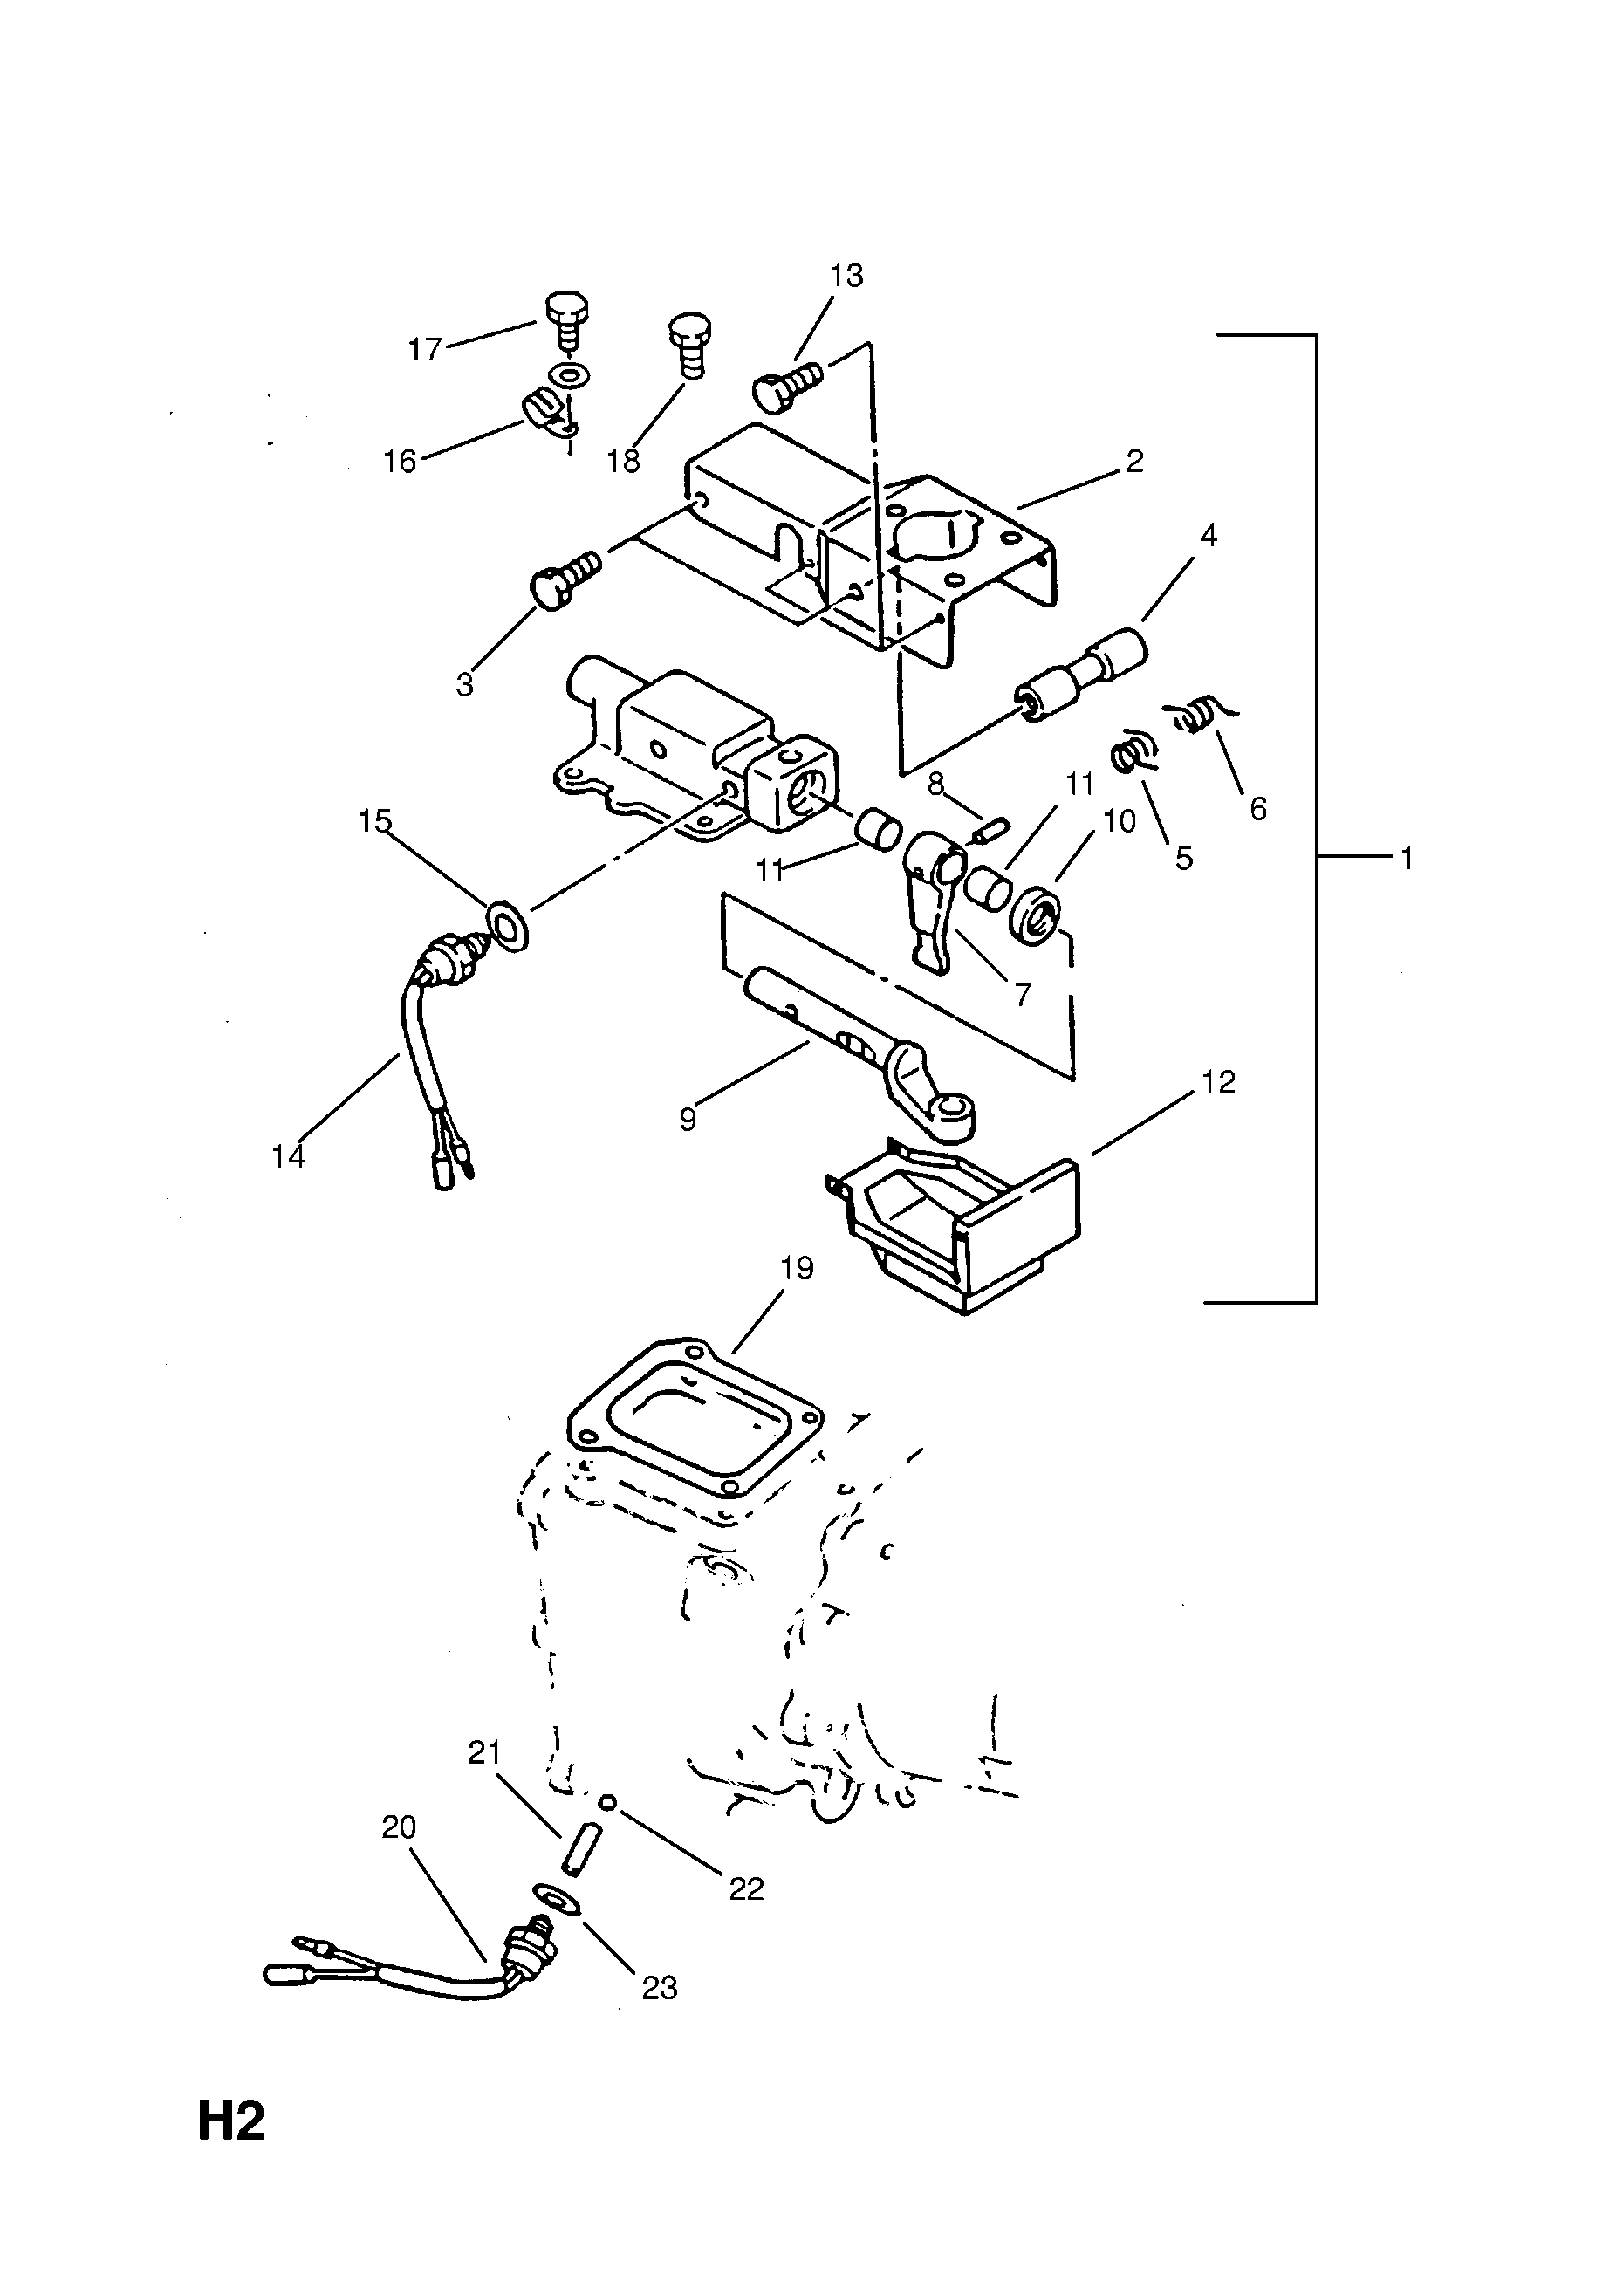 TRANSMISSION CASE AND COVERS (CONTD.) <small><i>[GEARSHIFT CONTROL]</i></small>